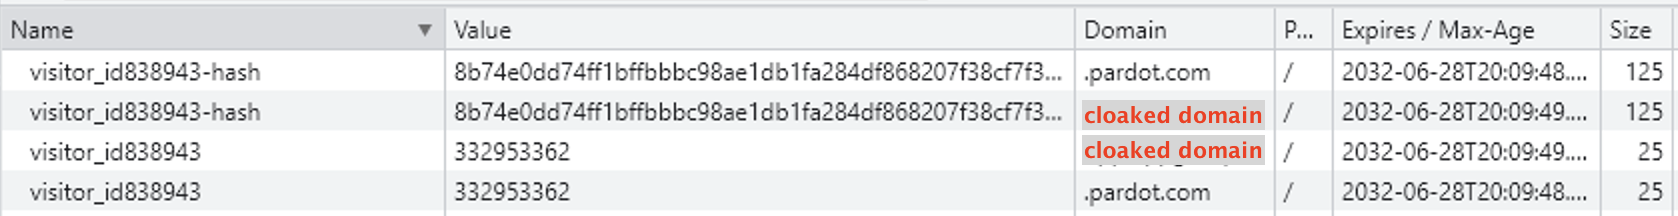 The visit_id and visit_id<acountid>hash cookies for the tracker and cloaked domains are the same.